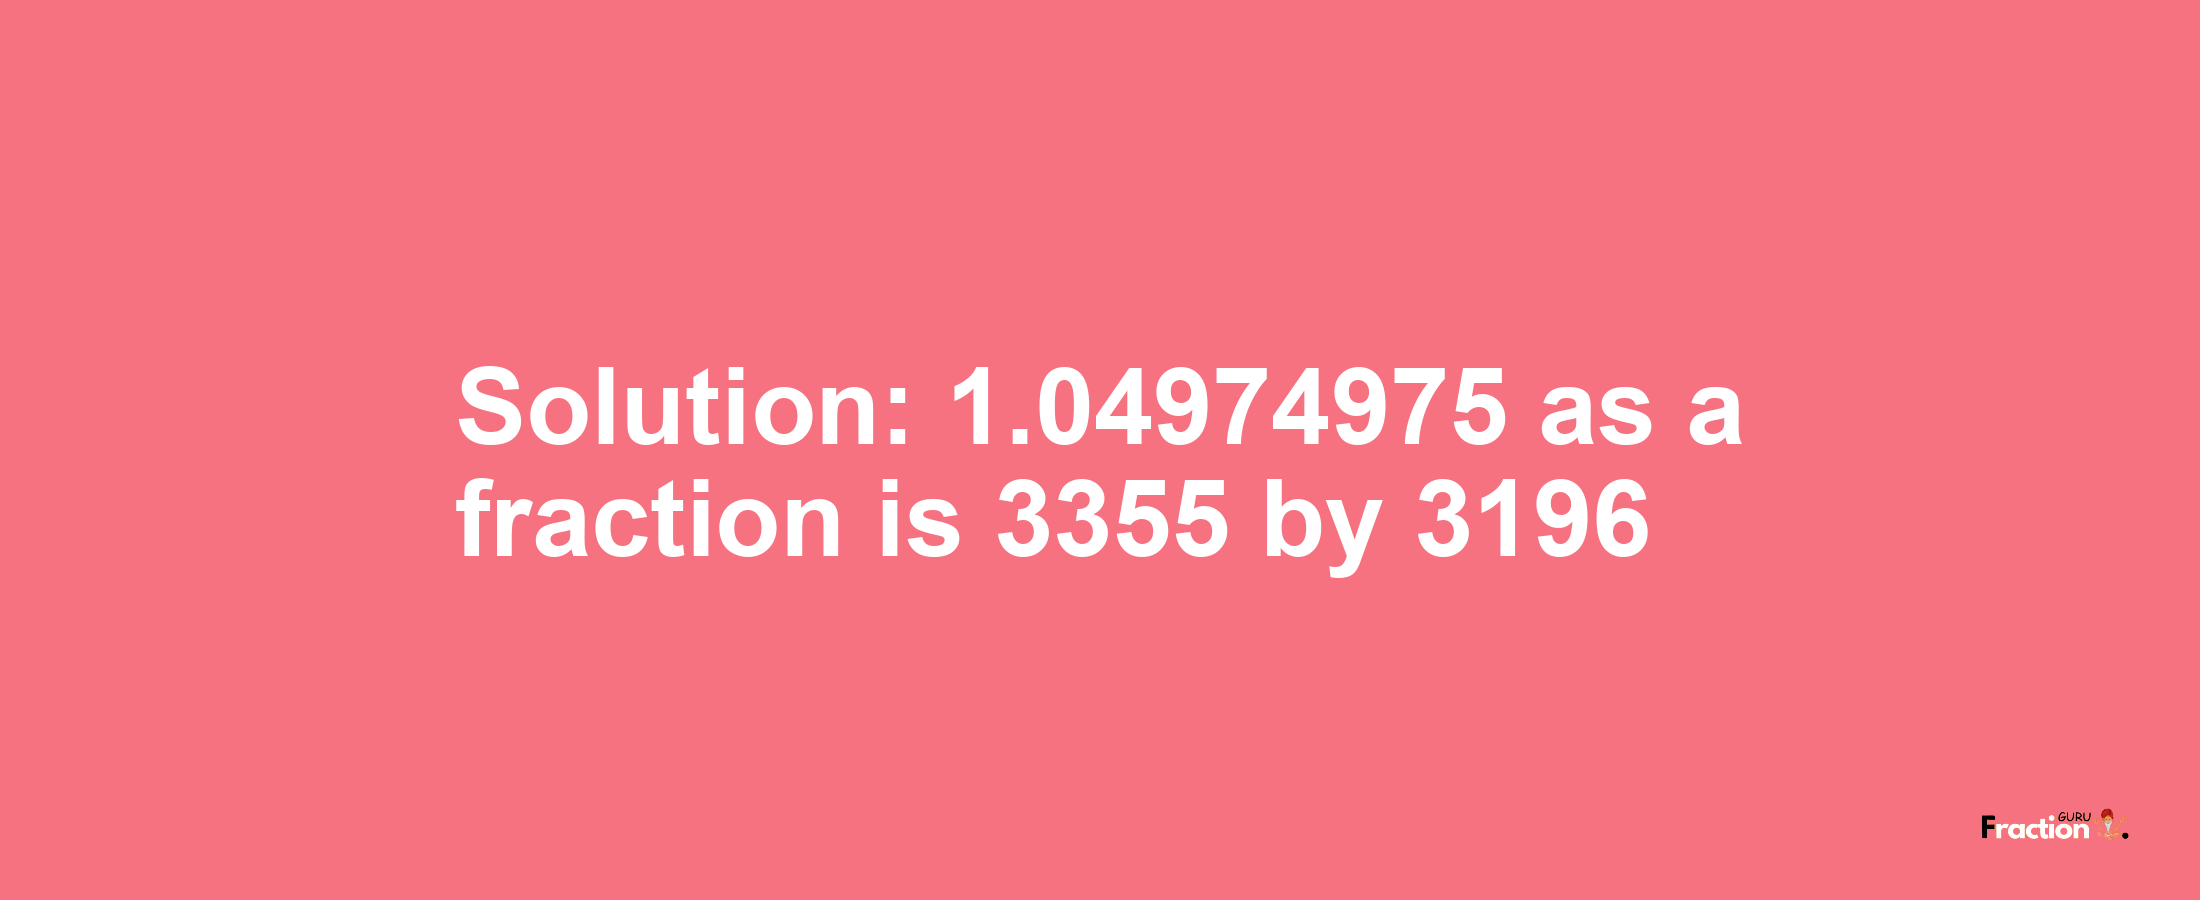 Solution:1.04974975 as a fraction is 3355/3196